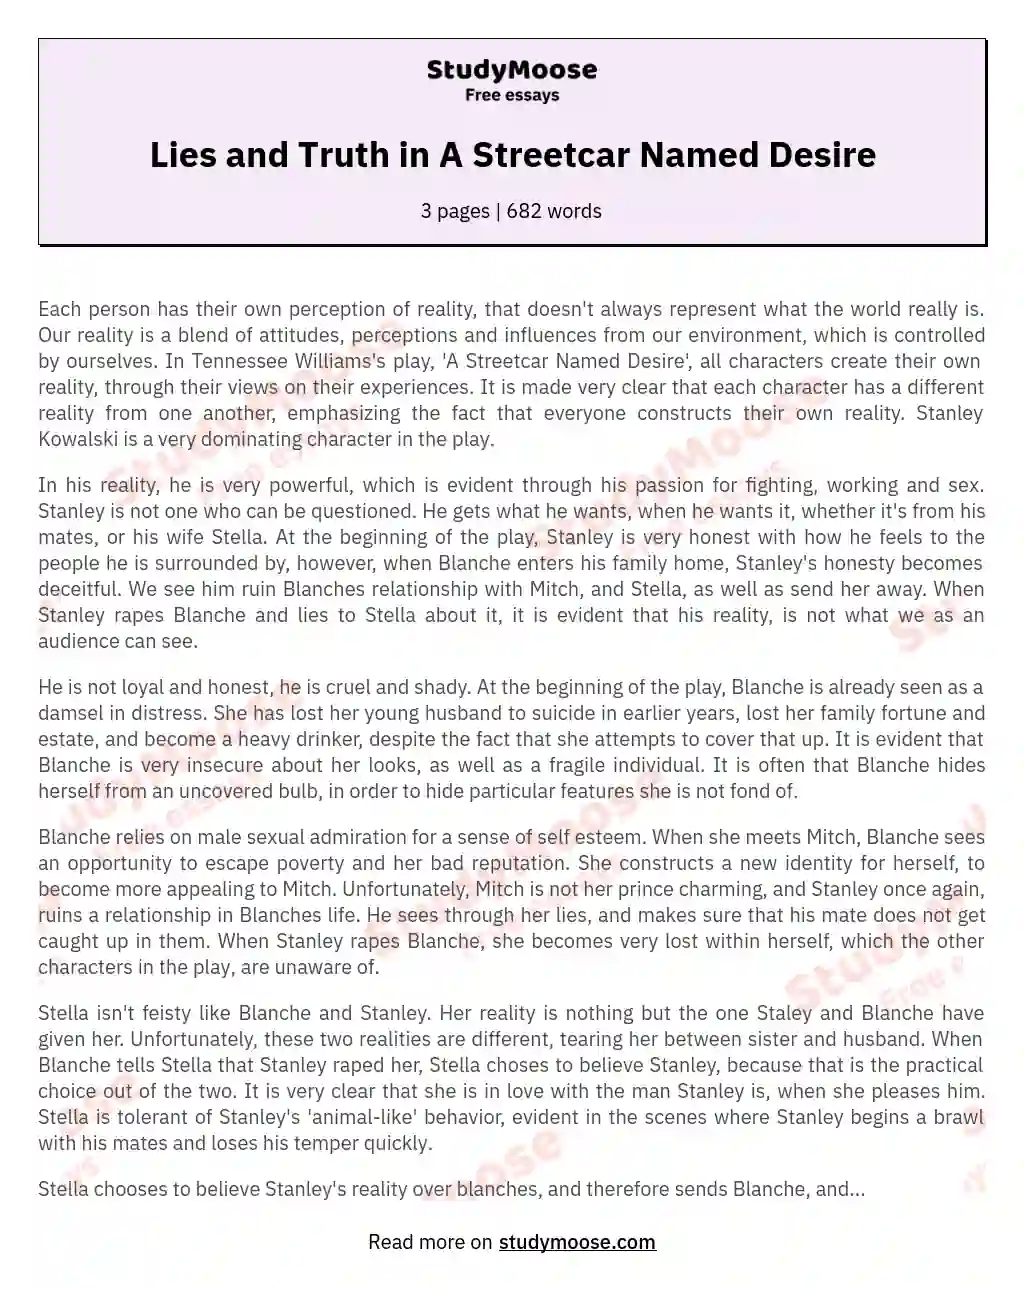 Lies and Truth in A Streetcar Named Desire